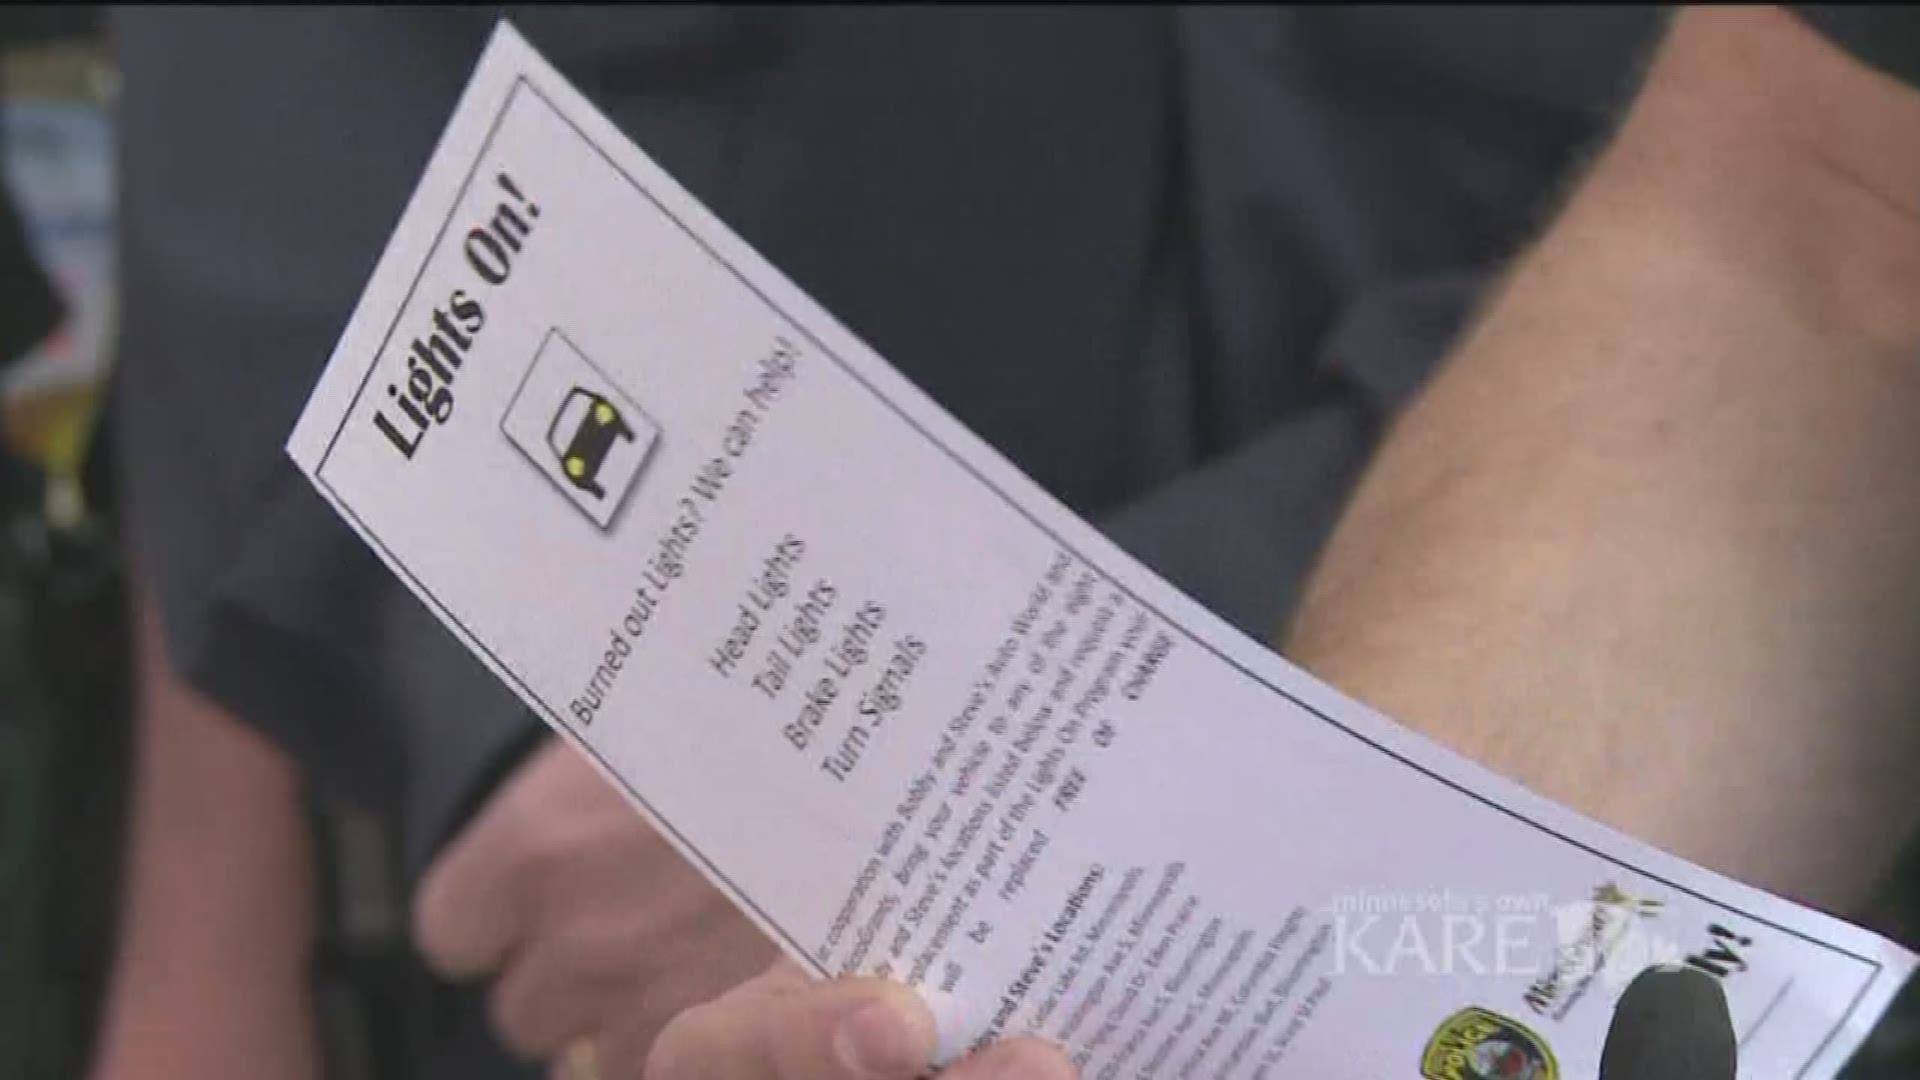 Police hand out coupons, not tickets